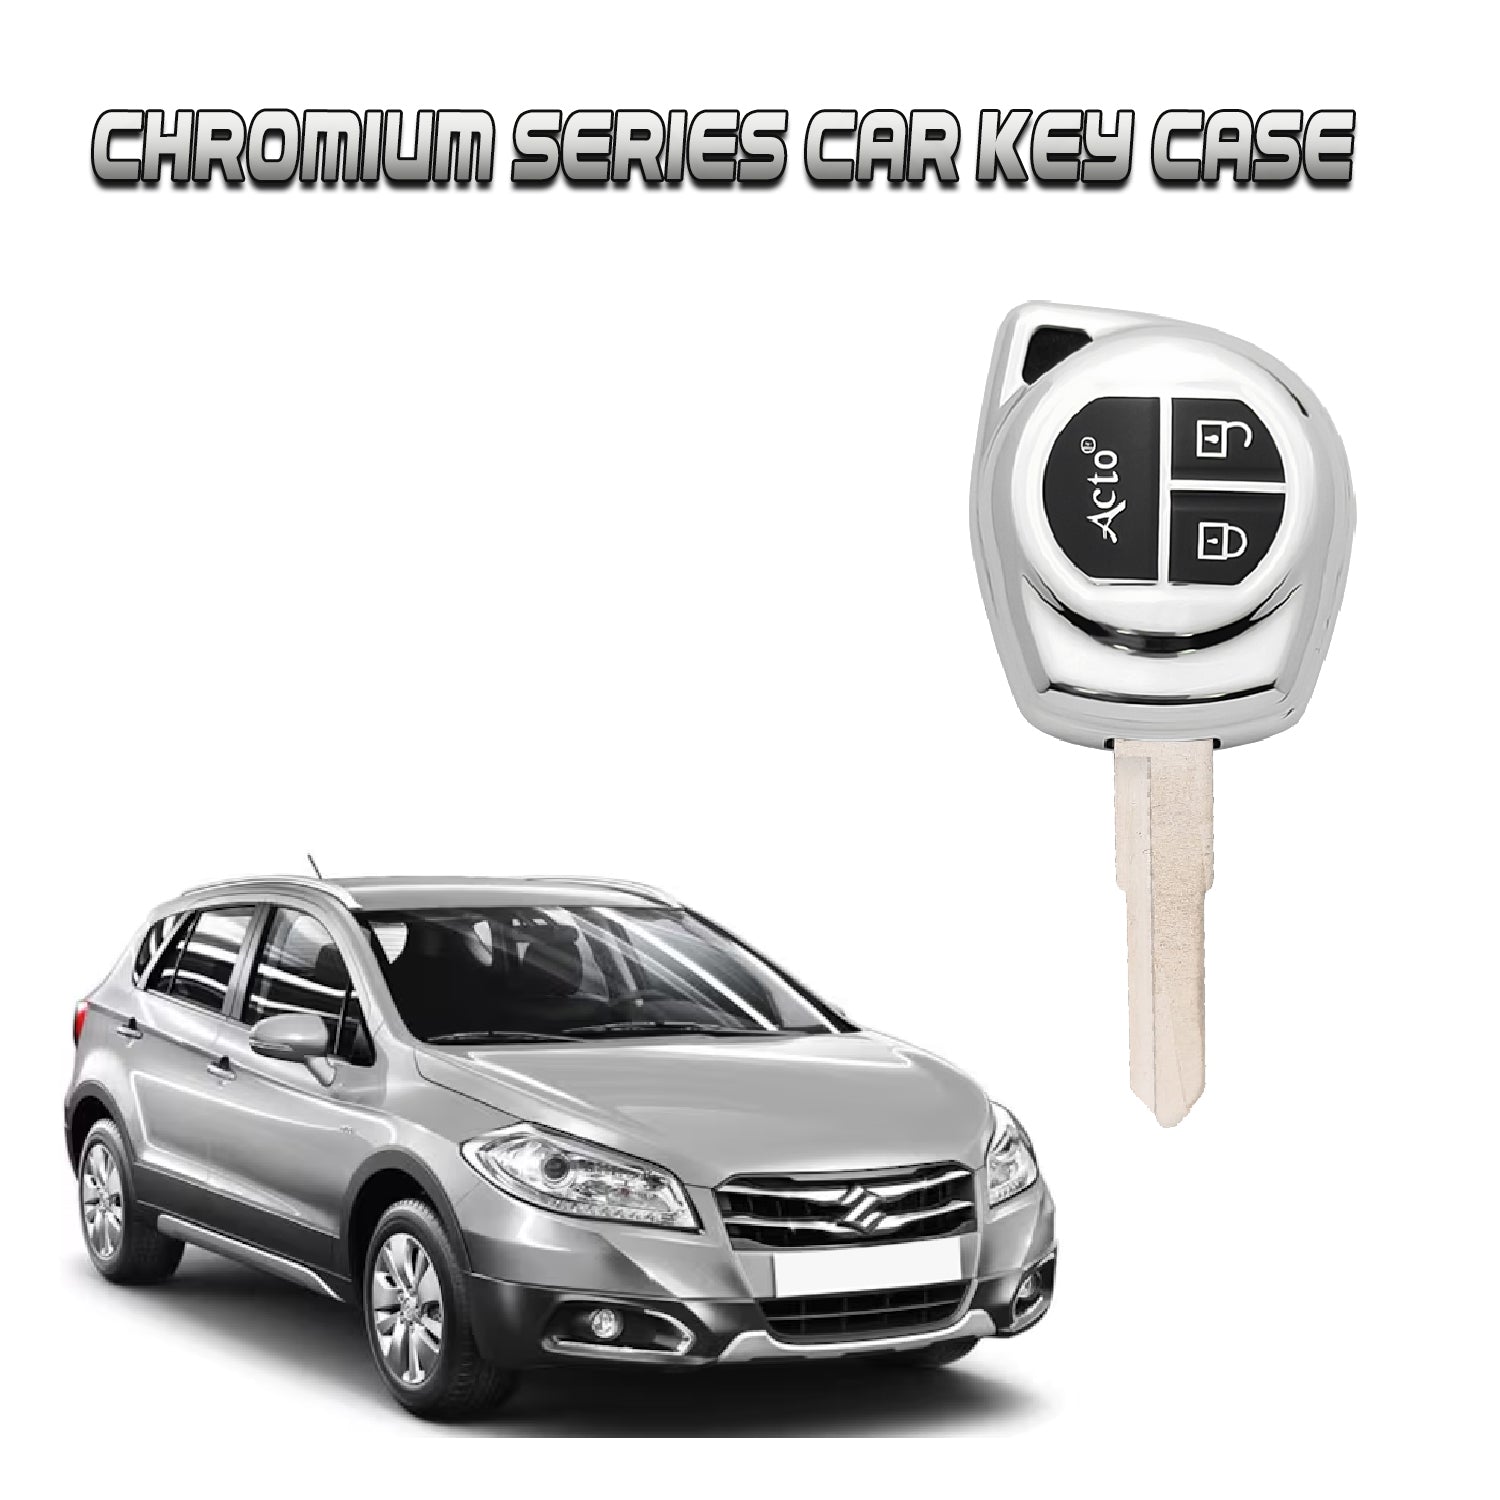 Acto Car Key Cover Chromium Series Compatible with S-Cross